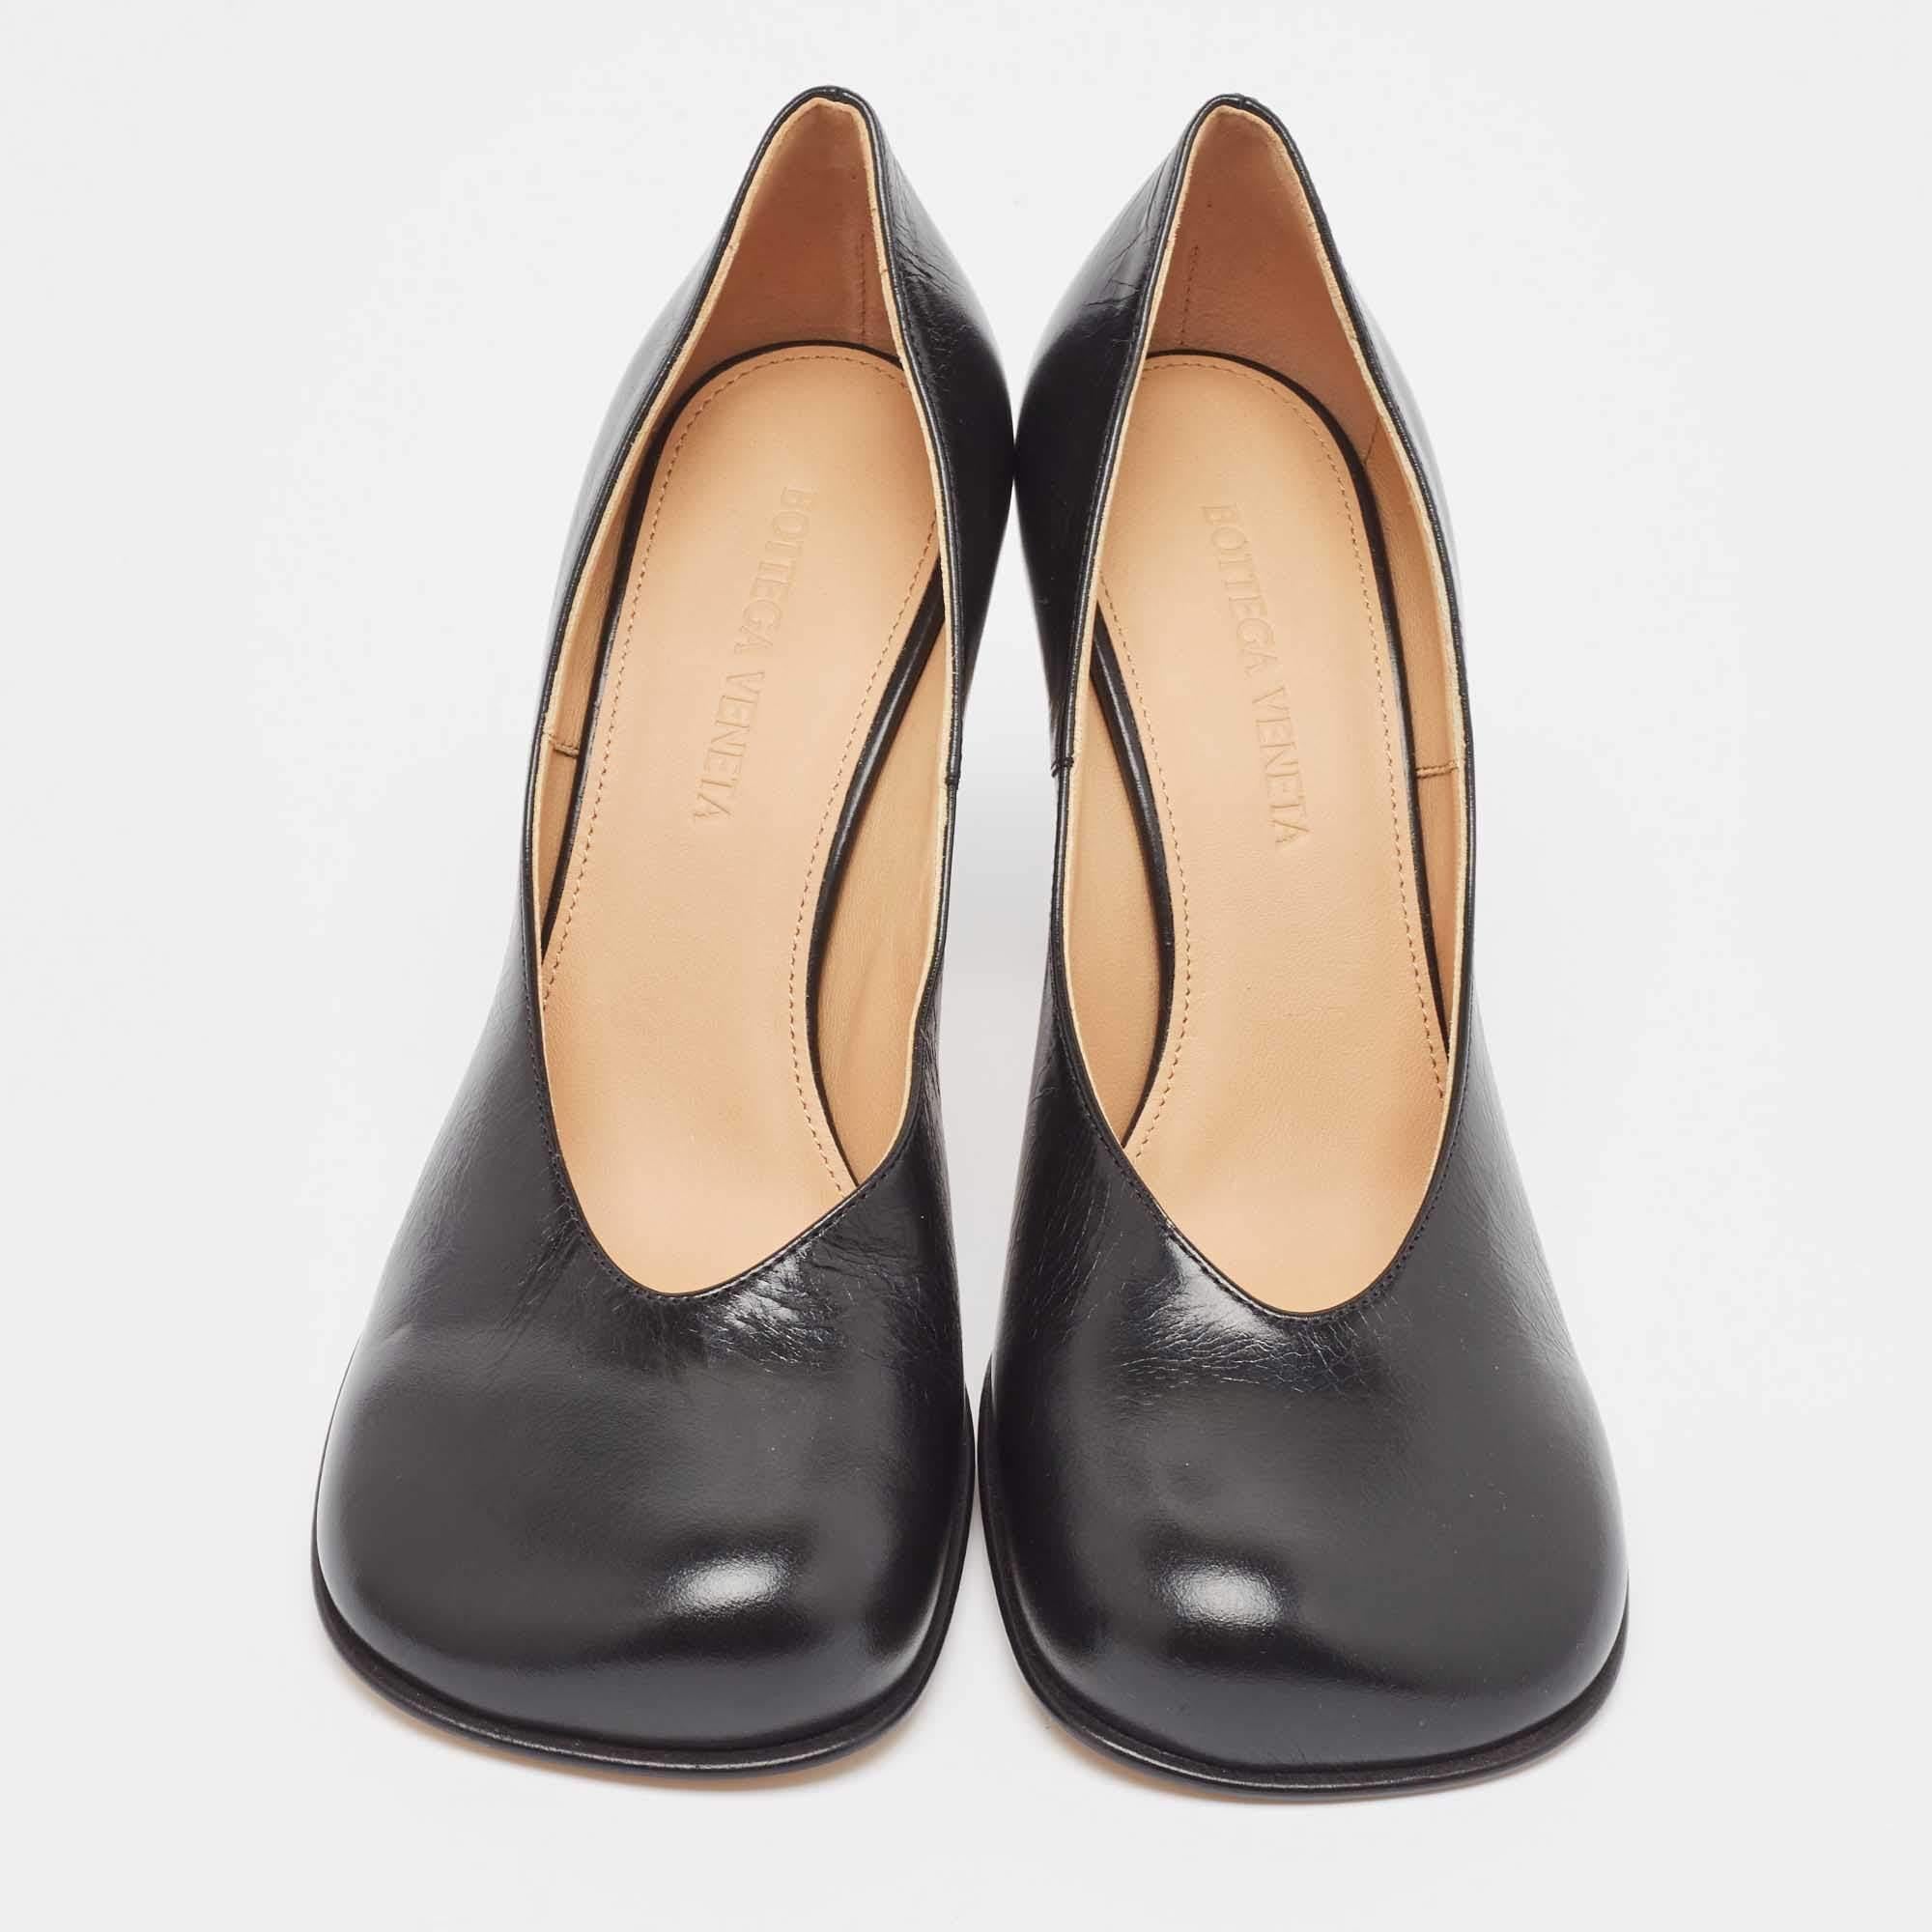 Exuding femininity and elegance, these pumps feature a chic silhouette with an attractive design. You can wear these pumps for a stylish look.

